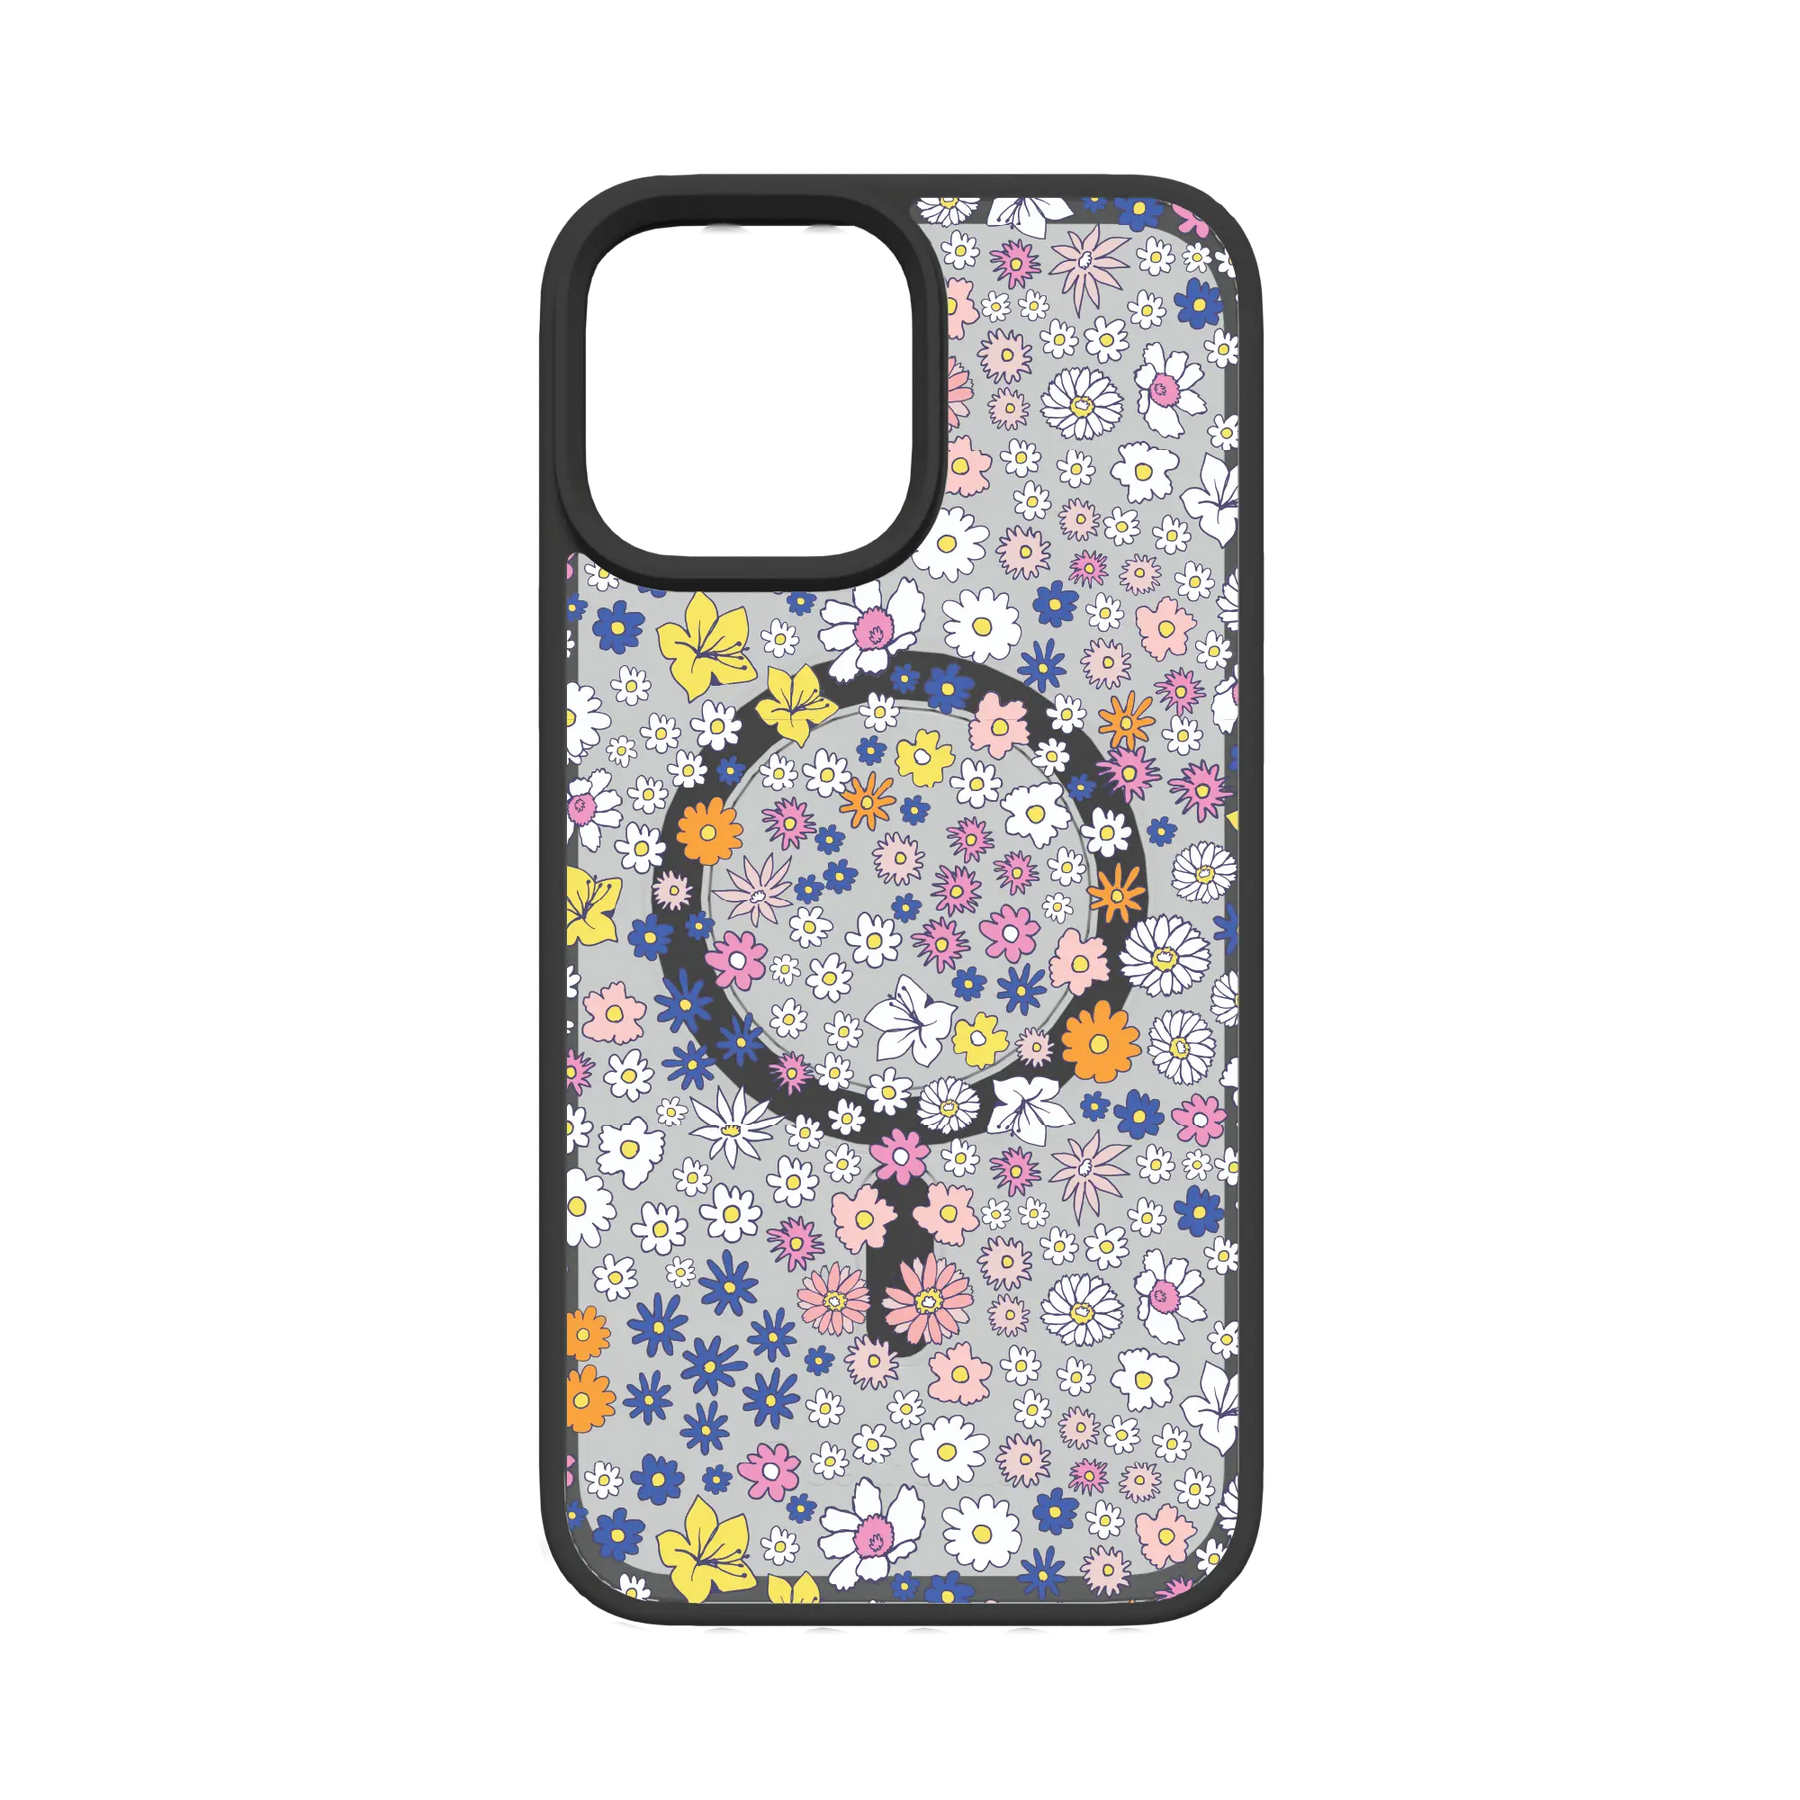 Apple-iPhone-12-Pro-Max-Crystal-Clear Wild Blossom | Protective MagSafe Case | Flower Series for Apple iPhone 12 Series cellhelmet cellhelmet